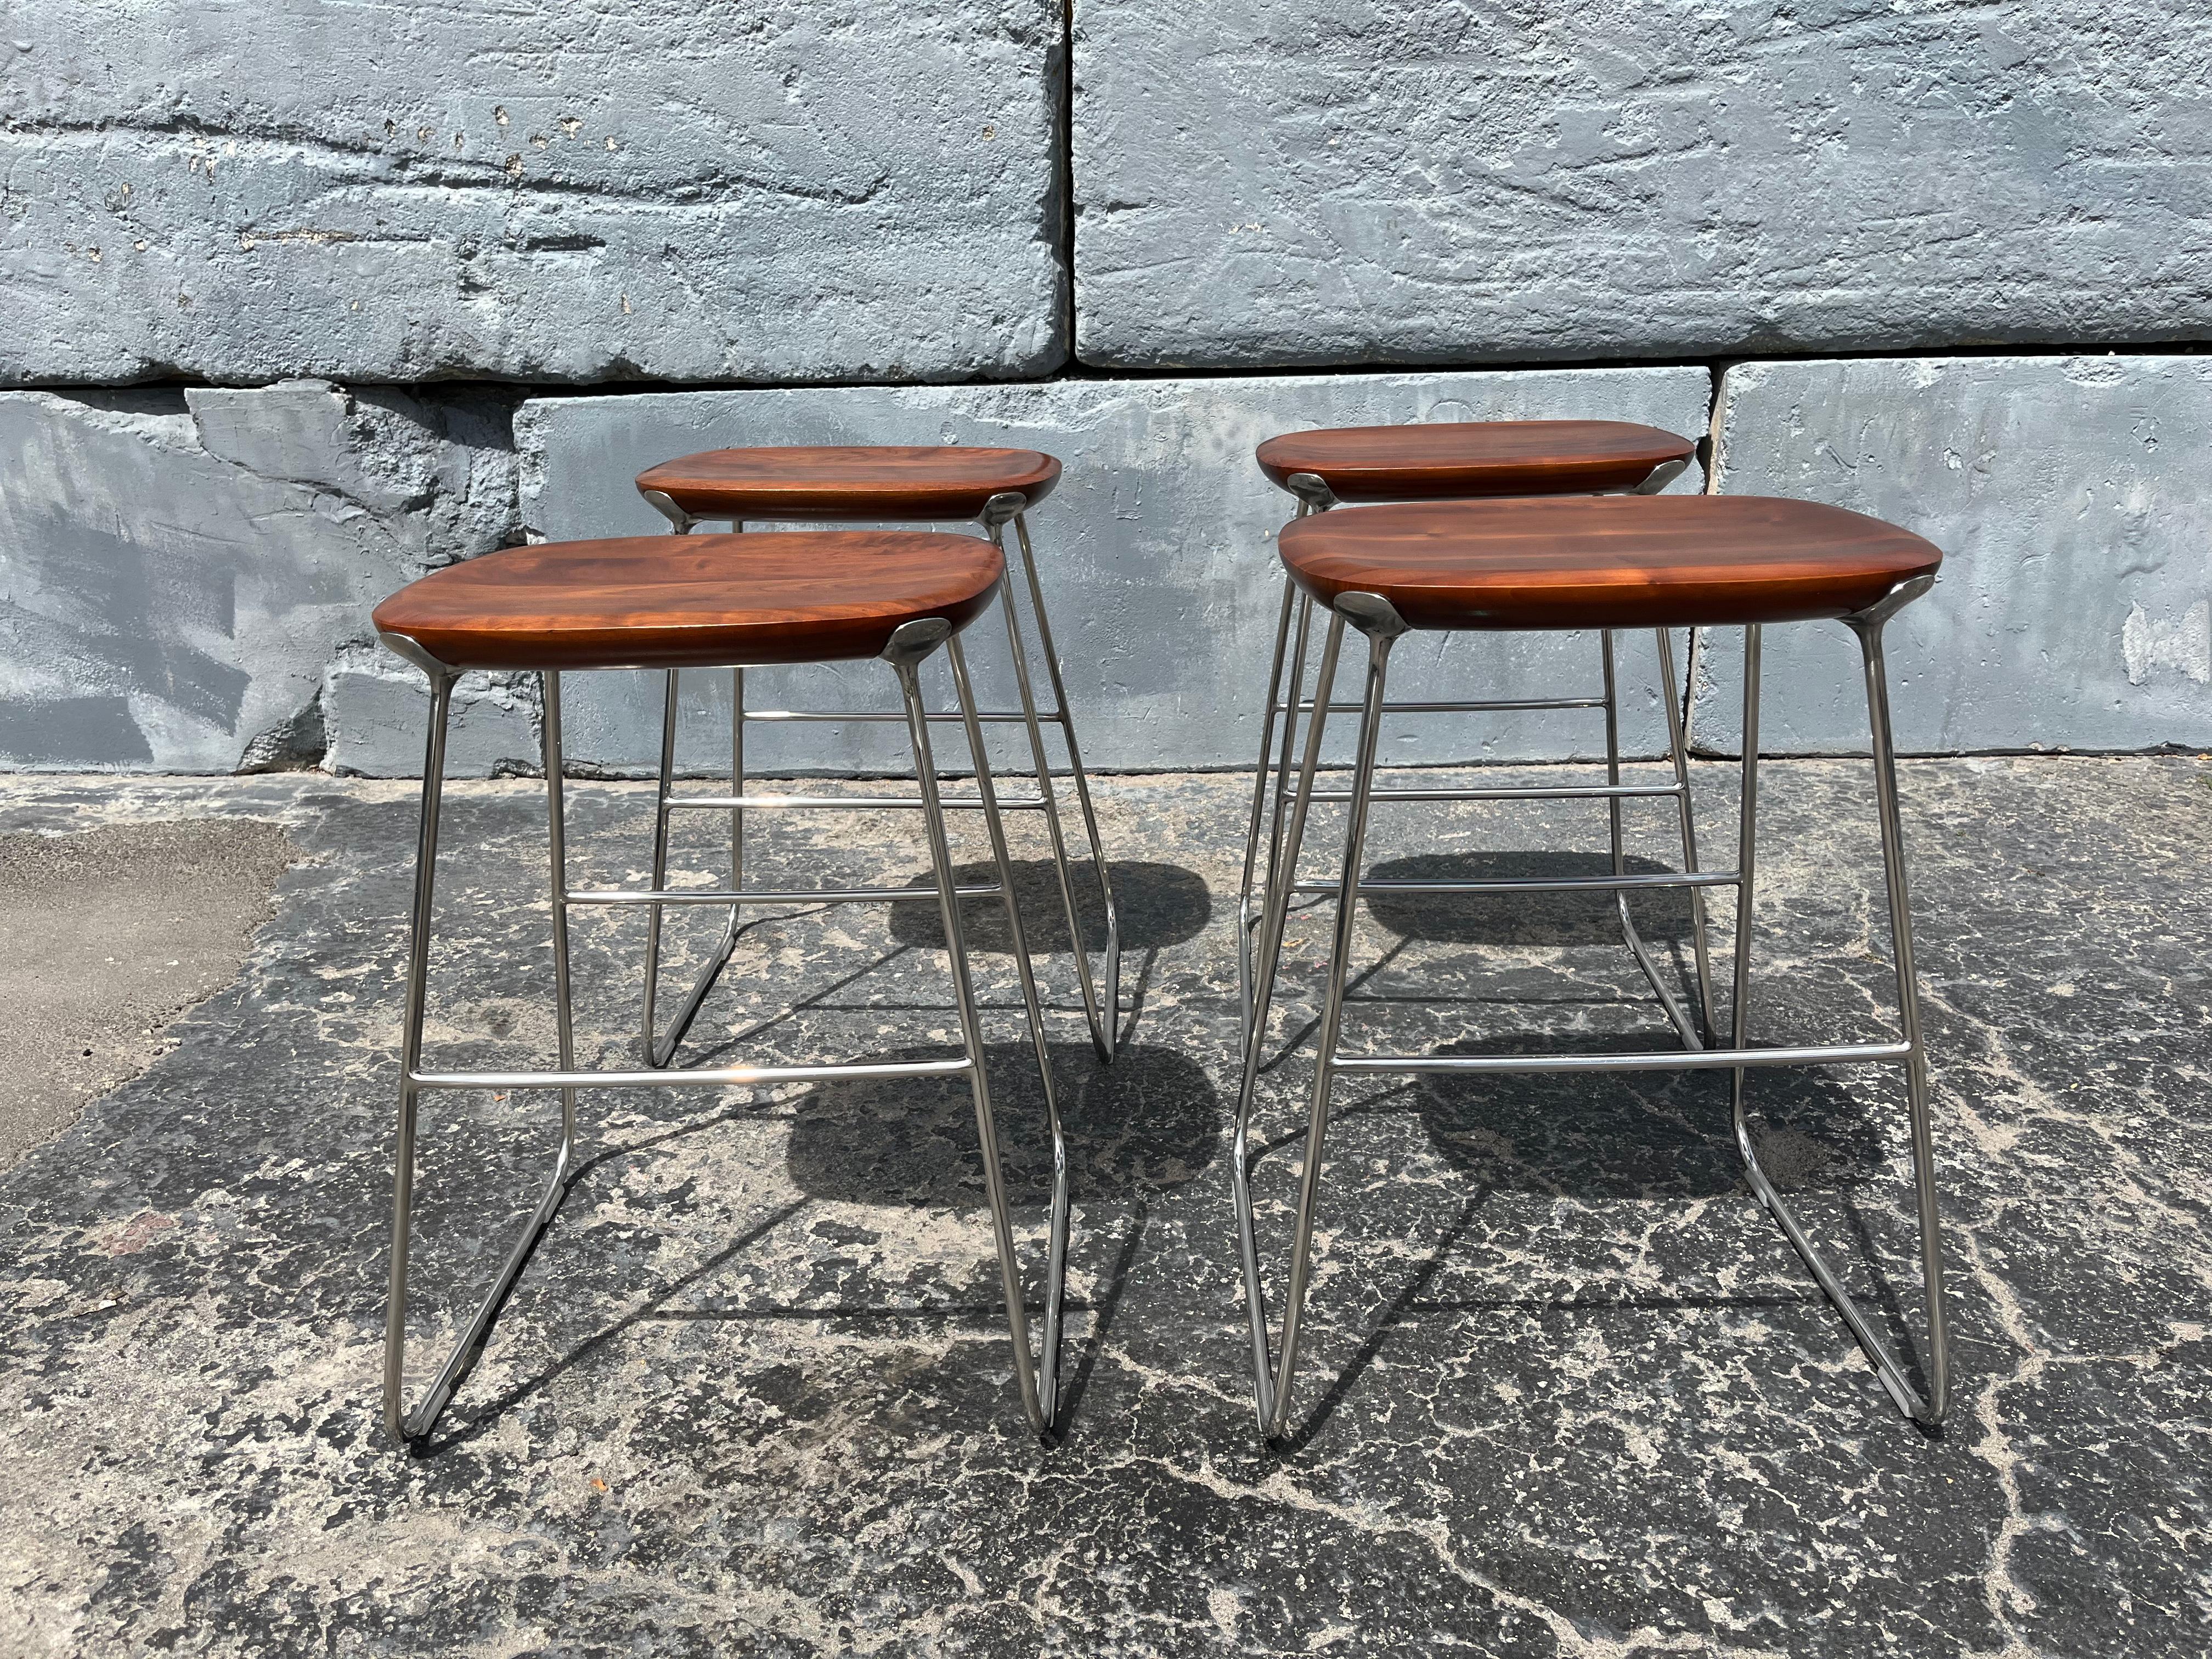 Laine Counter Stool by Defne Koz for Bernhardt Design, Walnut and Stainless Steel. Price is for one, four in total available. In the pictures stools may seem to be different height’s which is not the case, all are 24.5” in height.